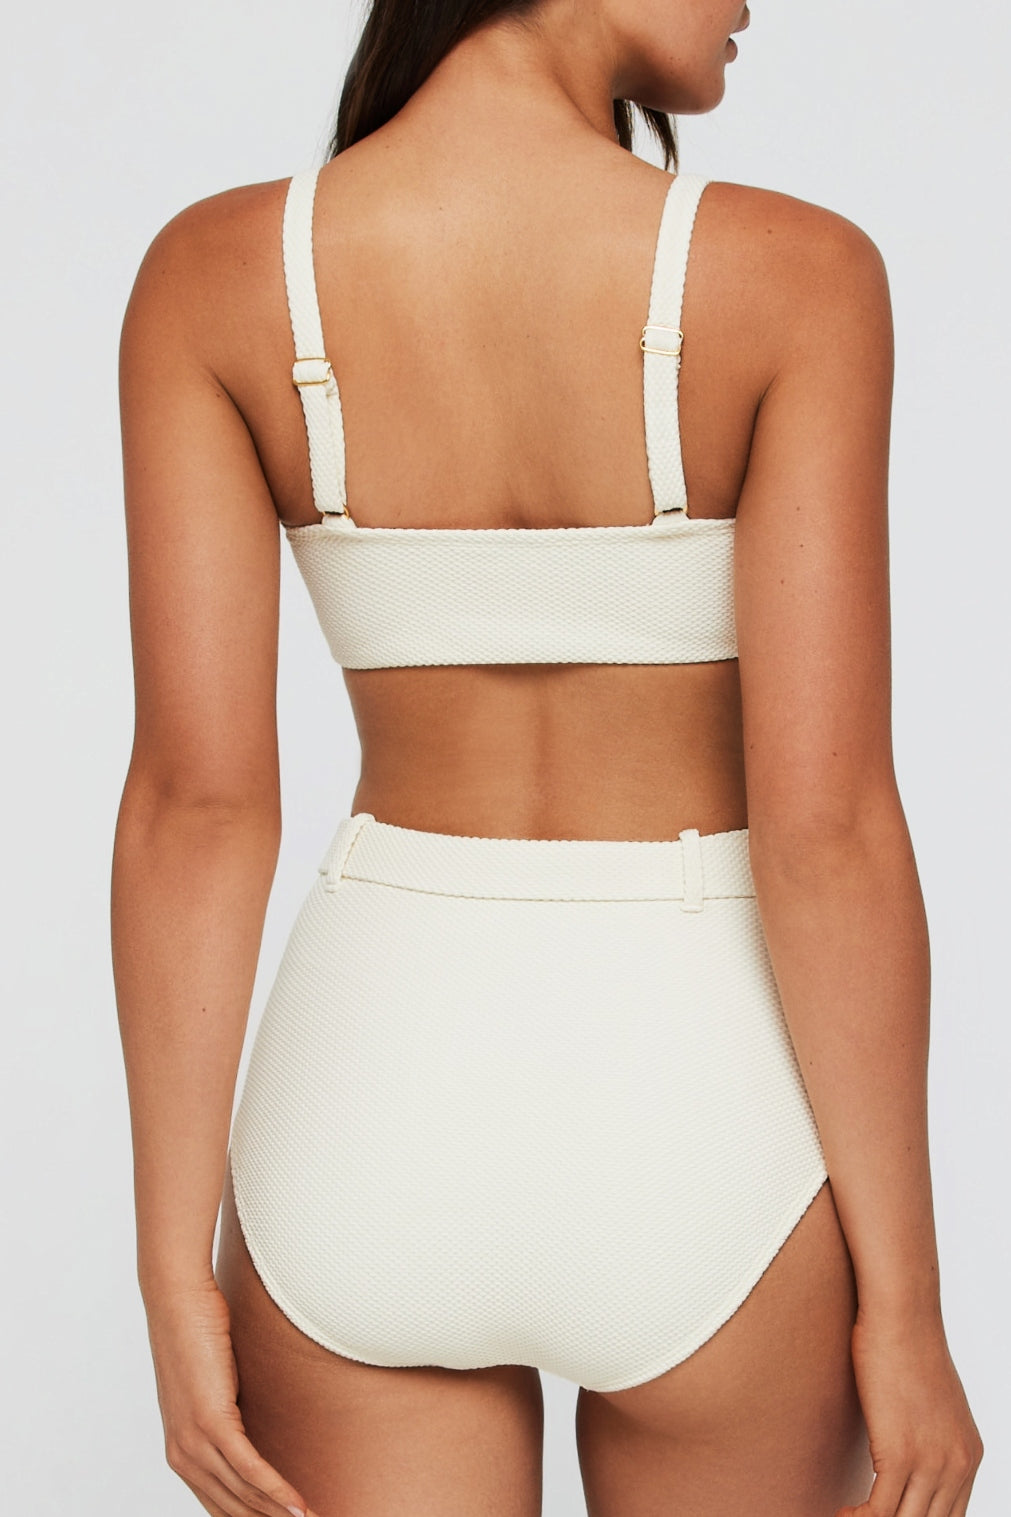 Lucia Two-Piece Swimsuit Top by Hermoza